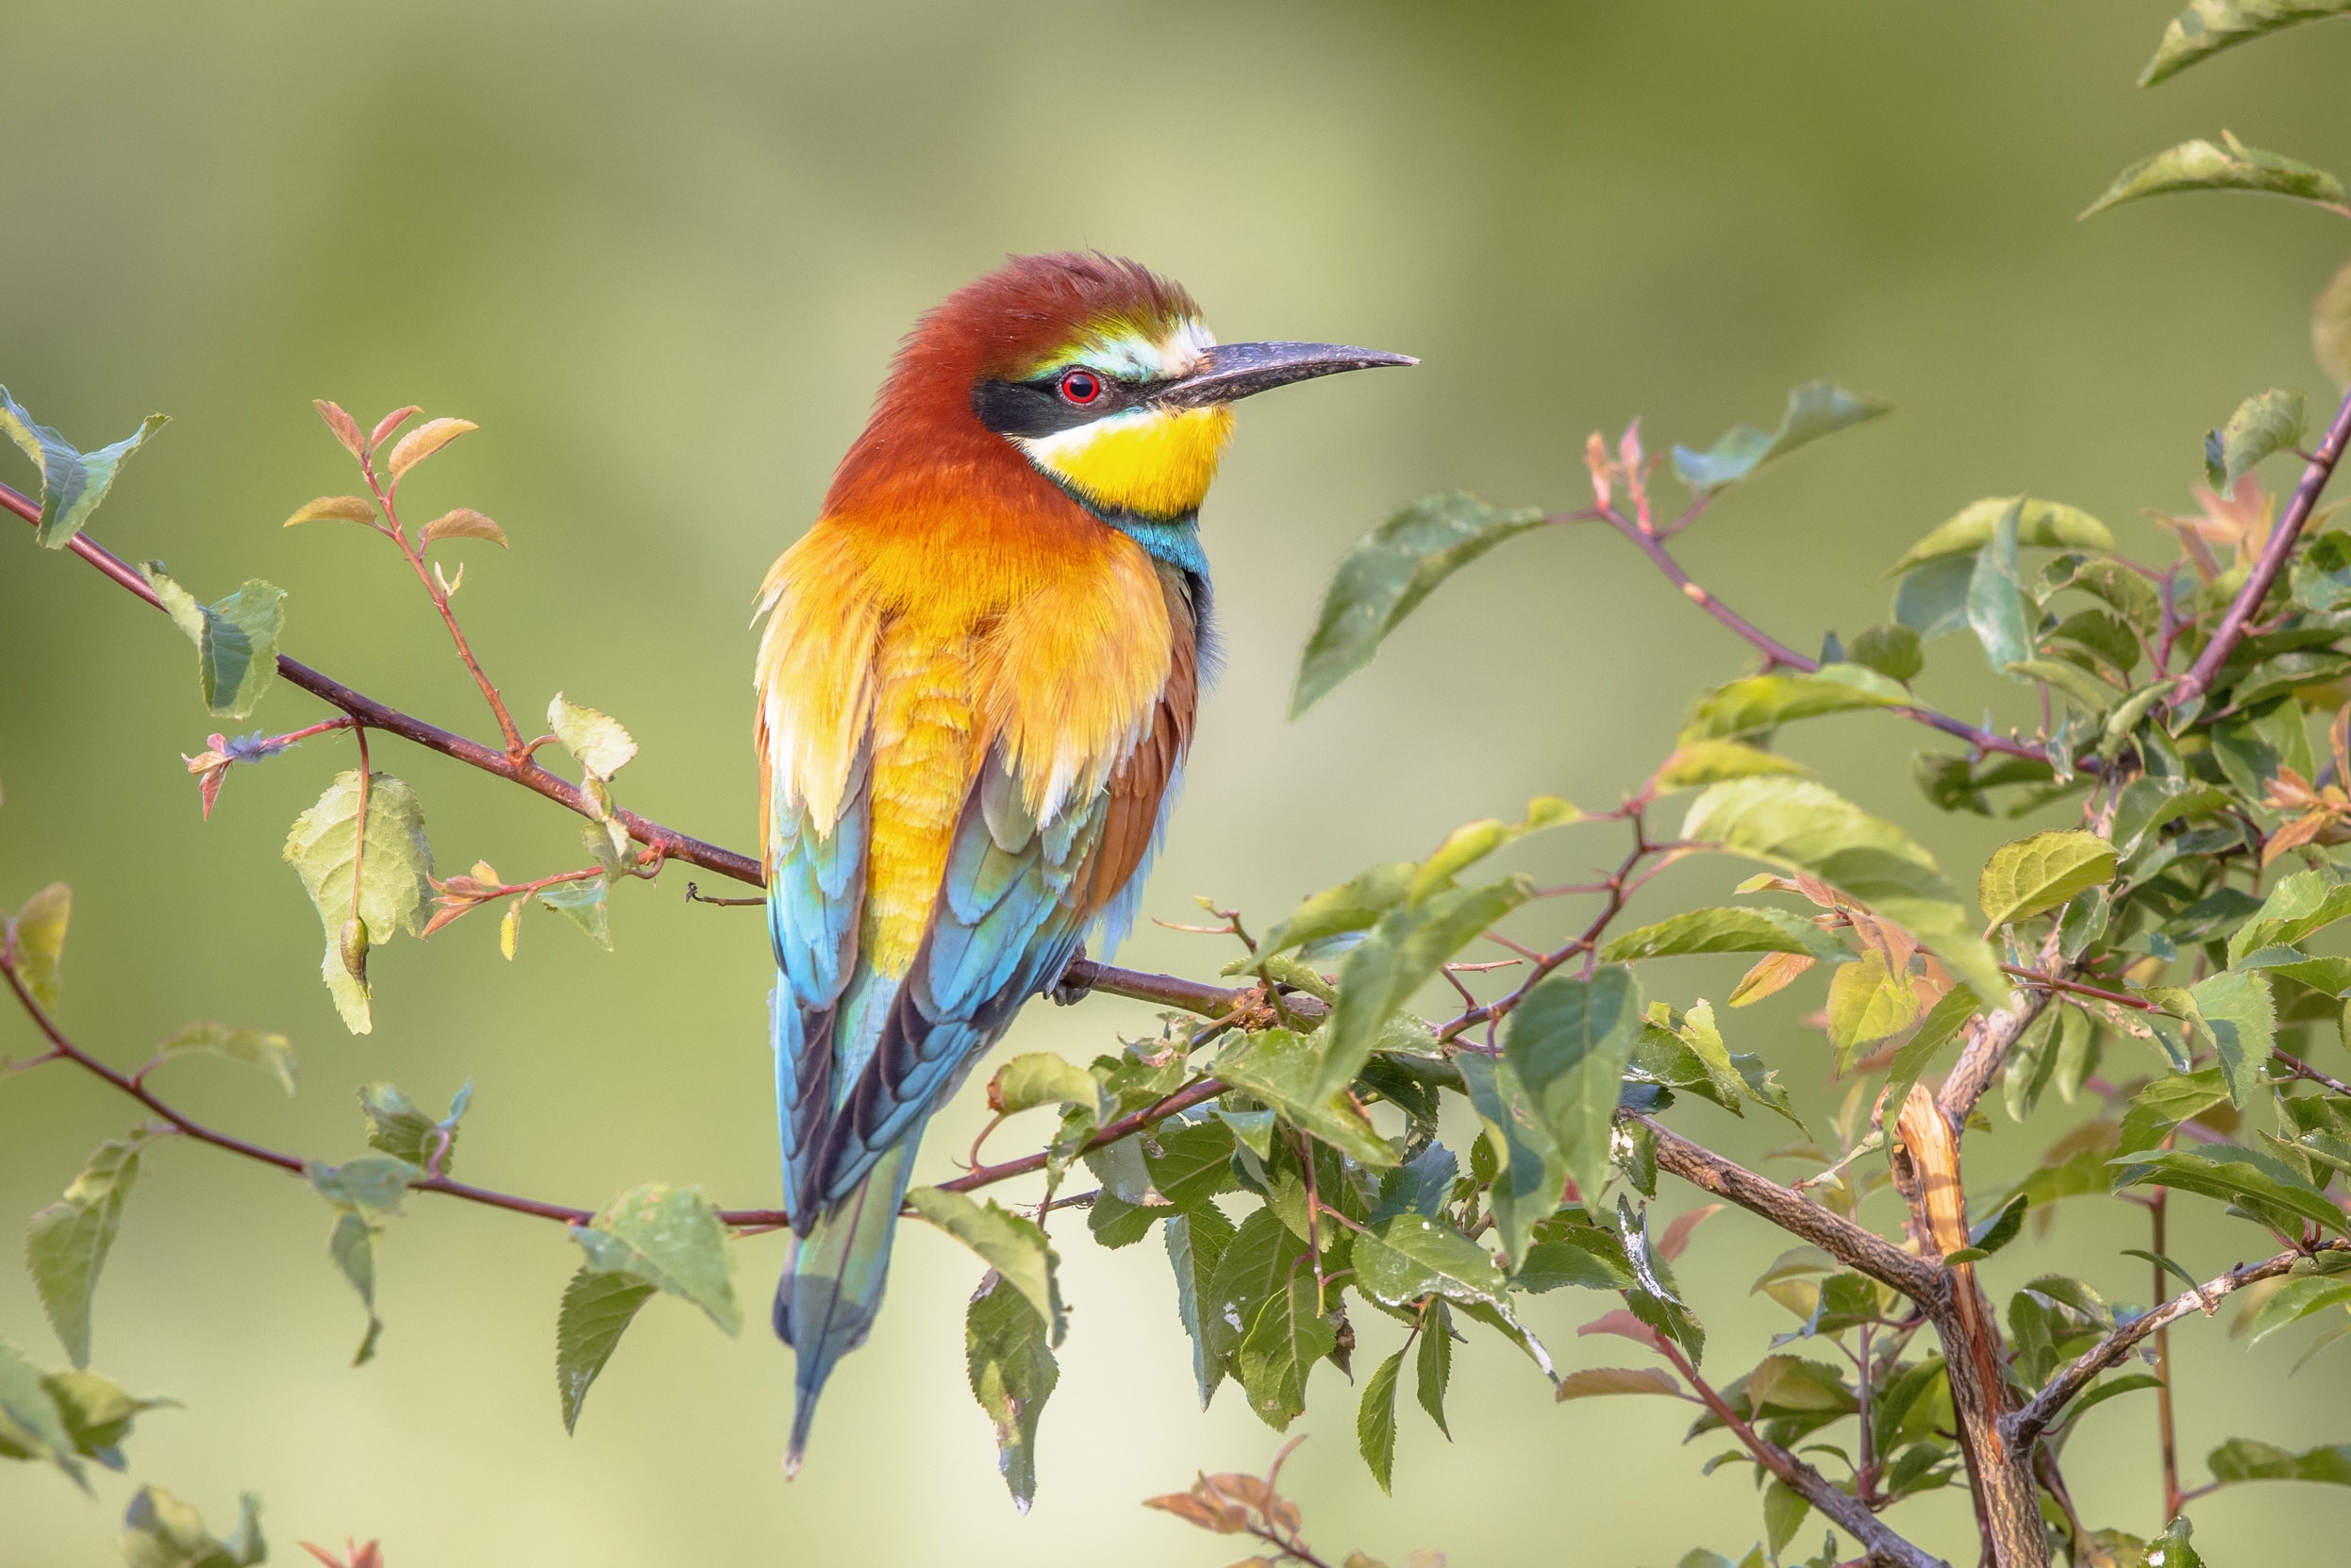 A lone Bee-Eater perched on a tree branch surrounded by green leaves.